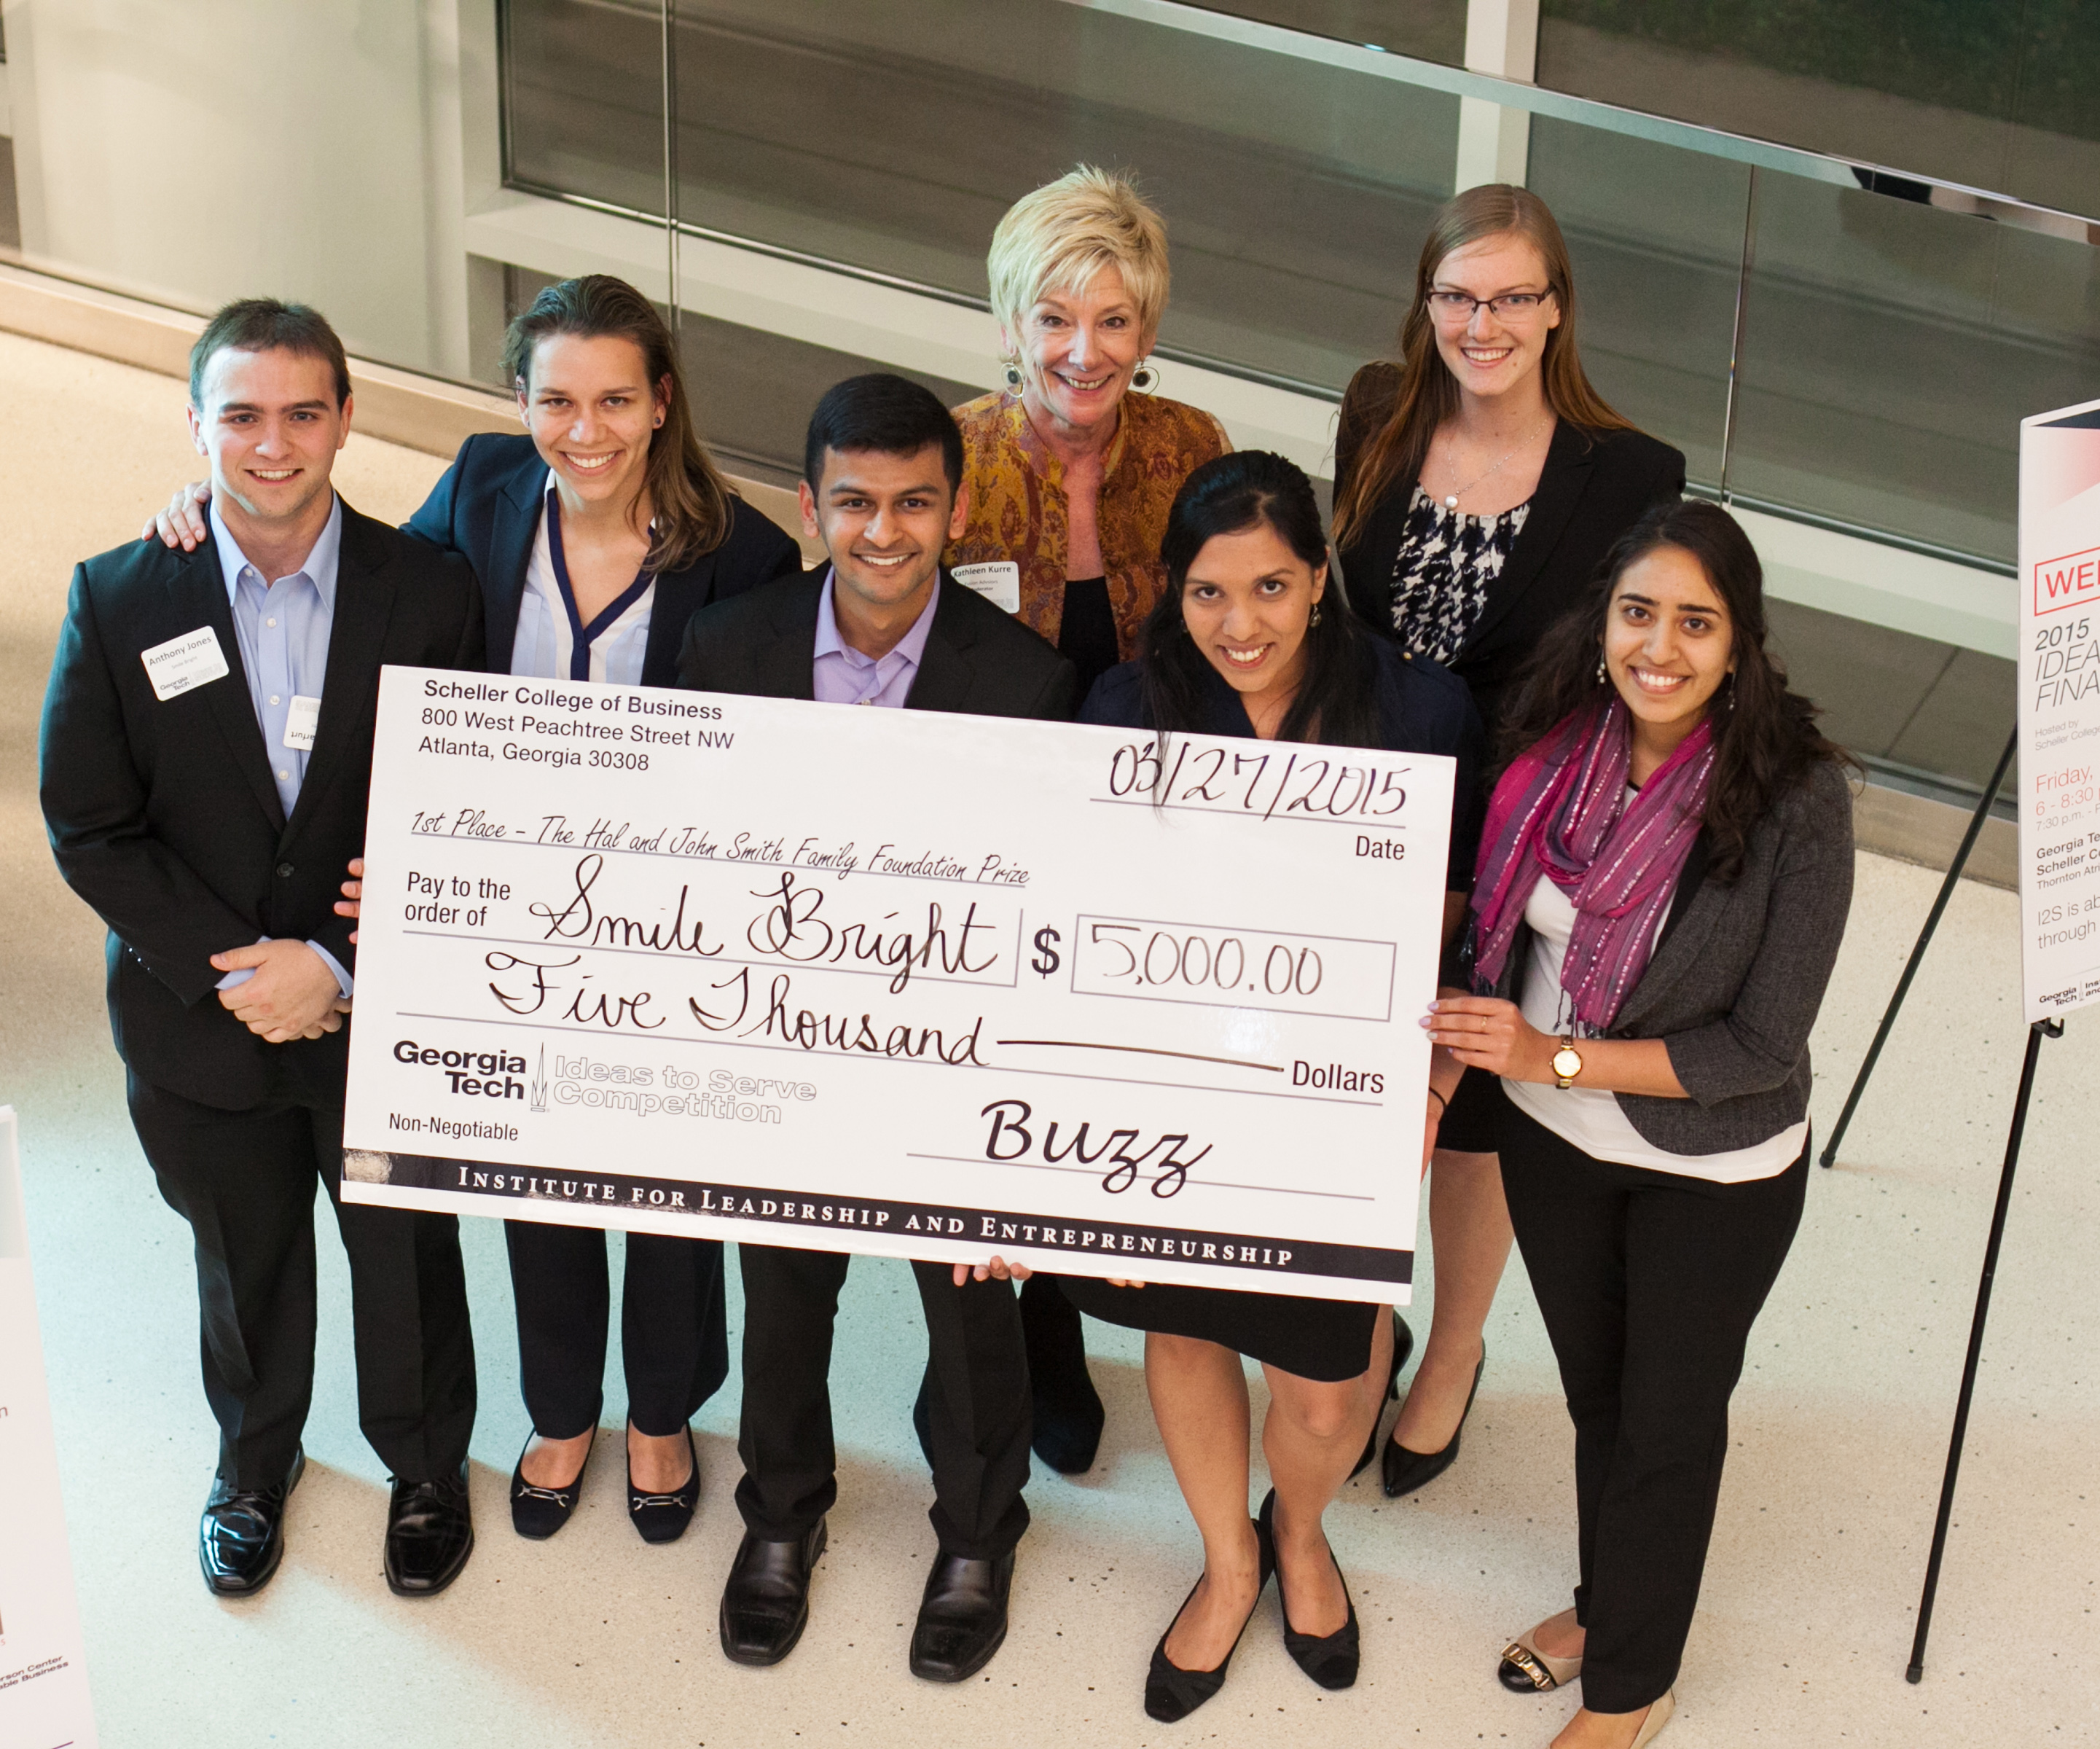 Smile Bright received $5,000 for winning the Ideas Track of the 2015 Ideas to Serve Competition.